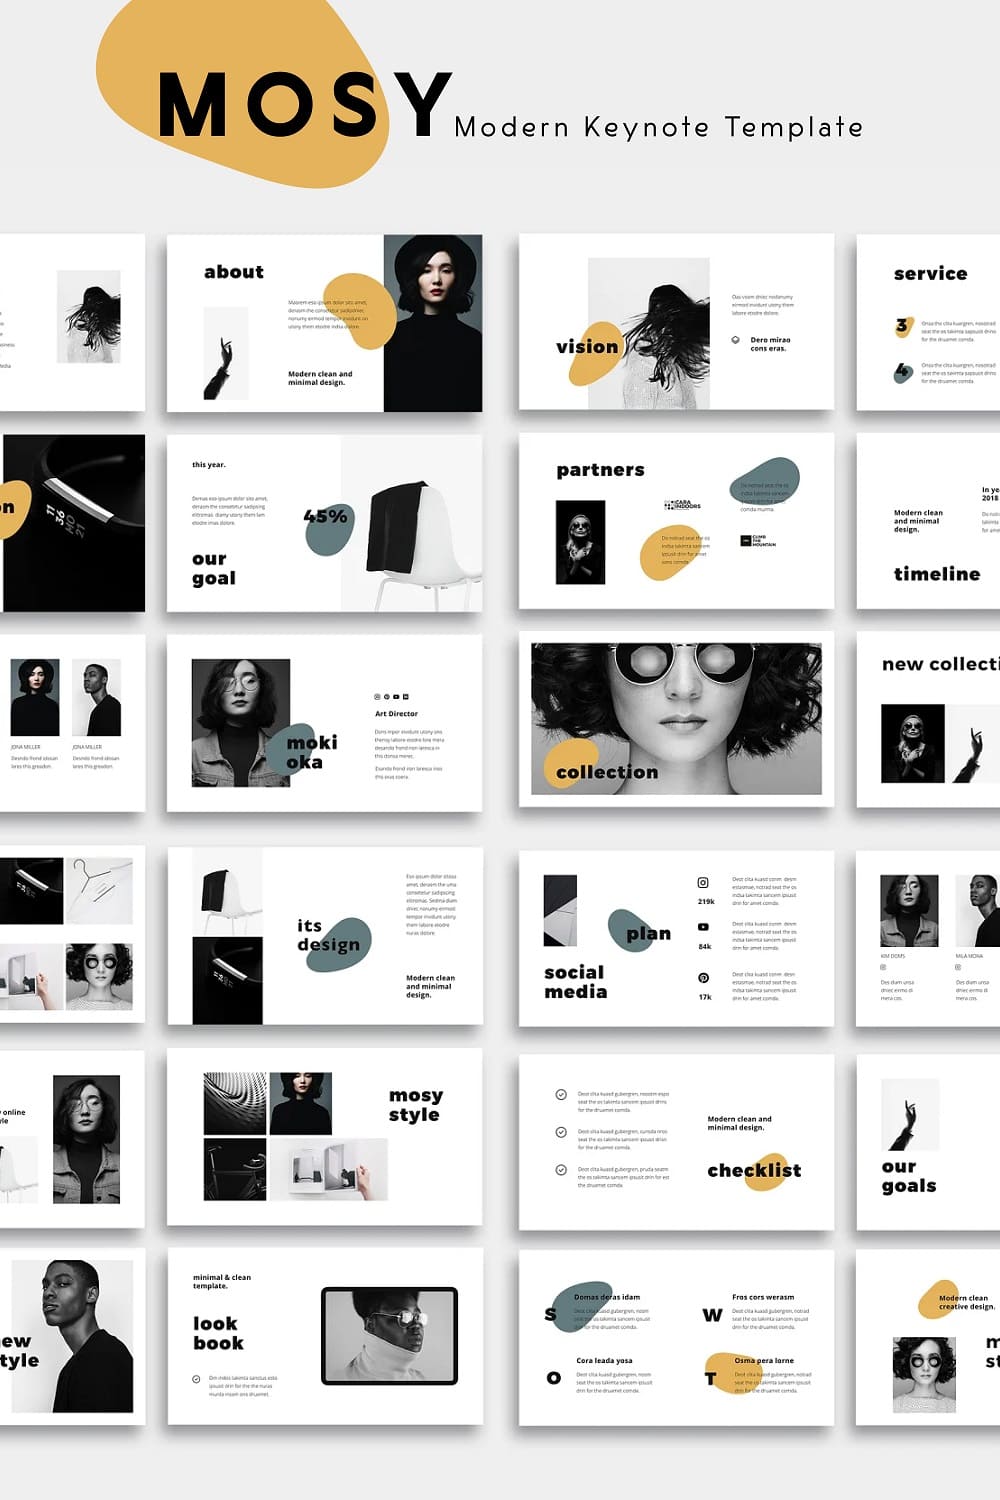 24 slides - Mosy modern keynote template, vertical picture.